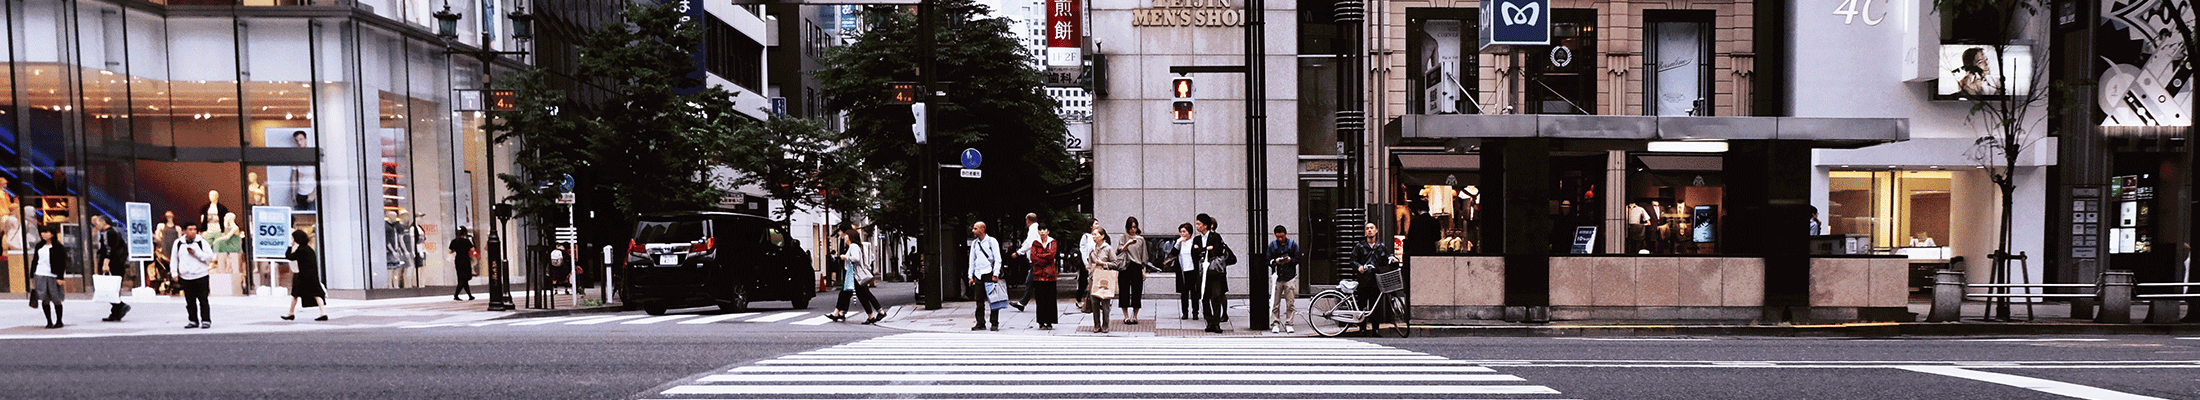 Group of people crossing the road on pedestrian crossing outside the shopping mall